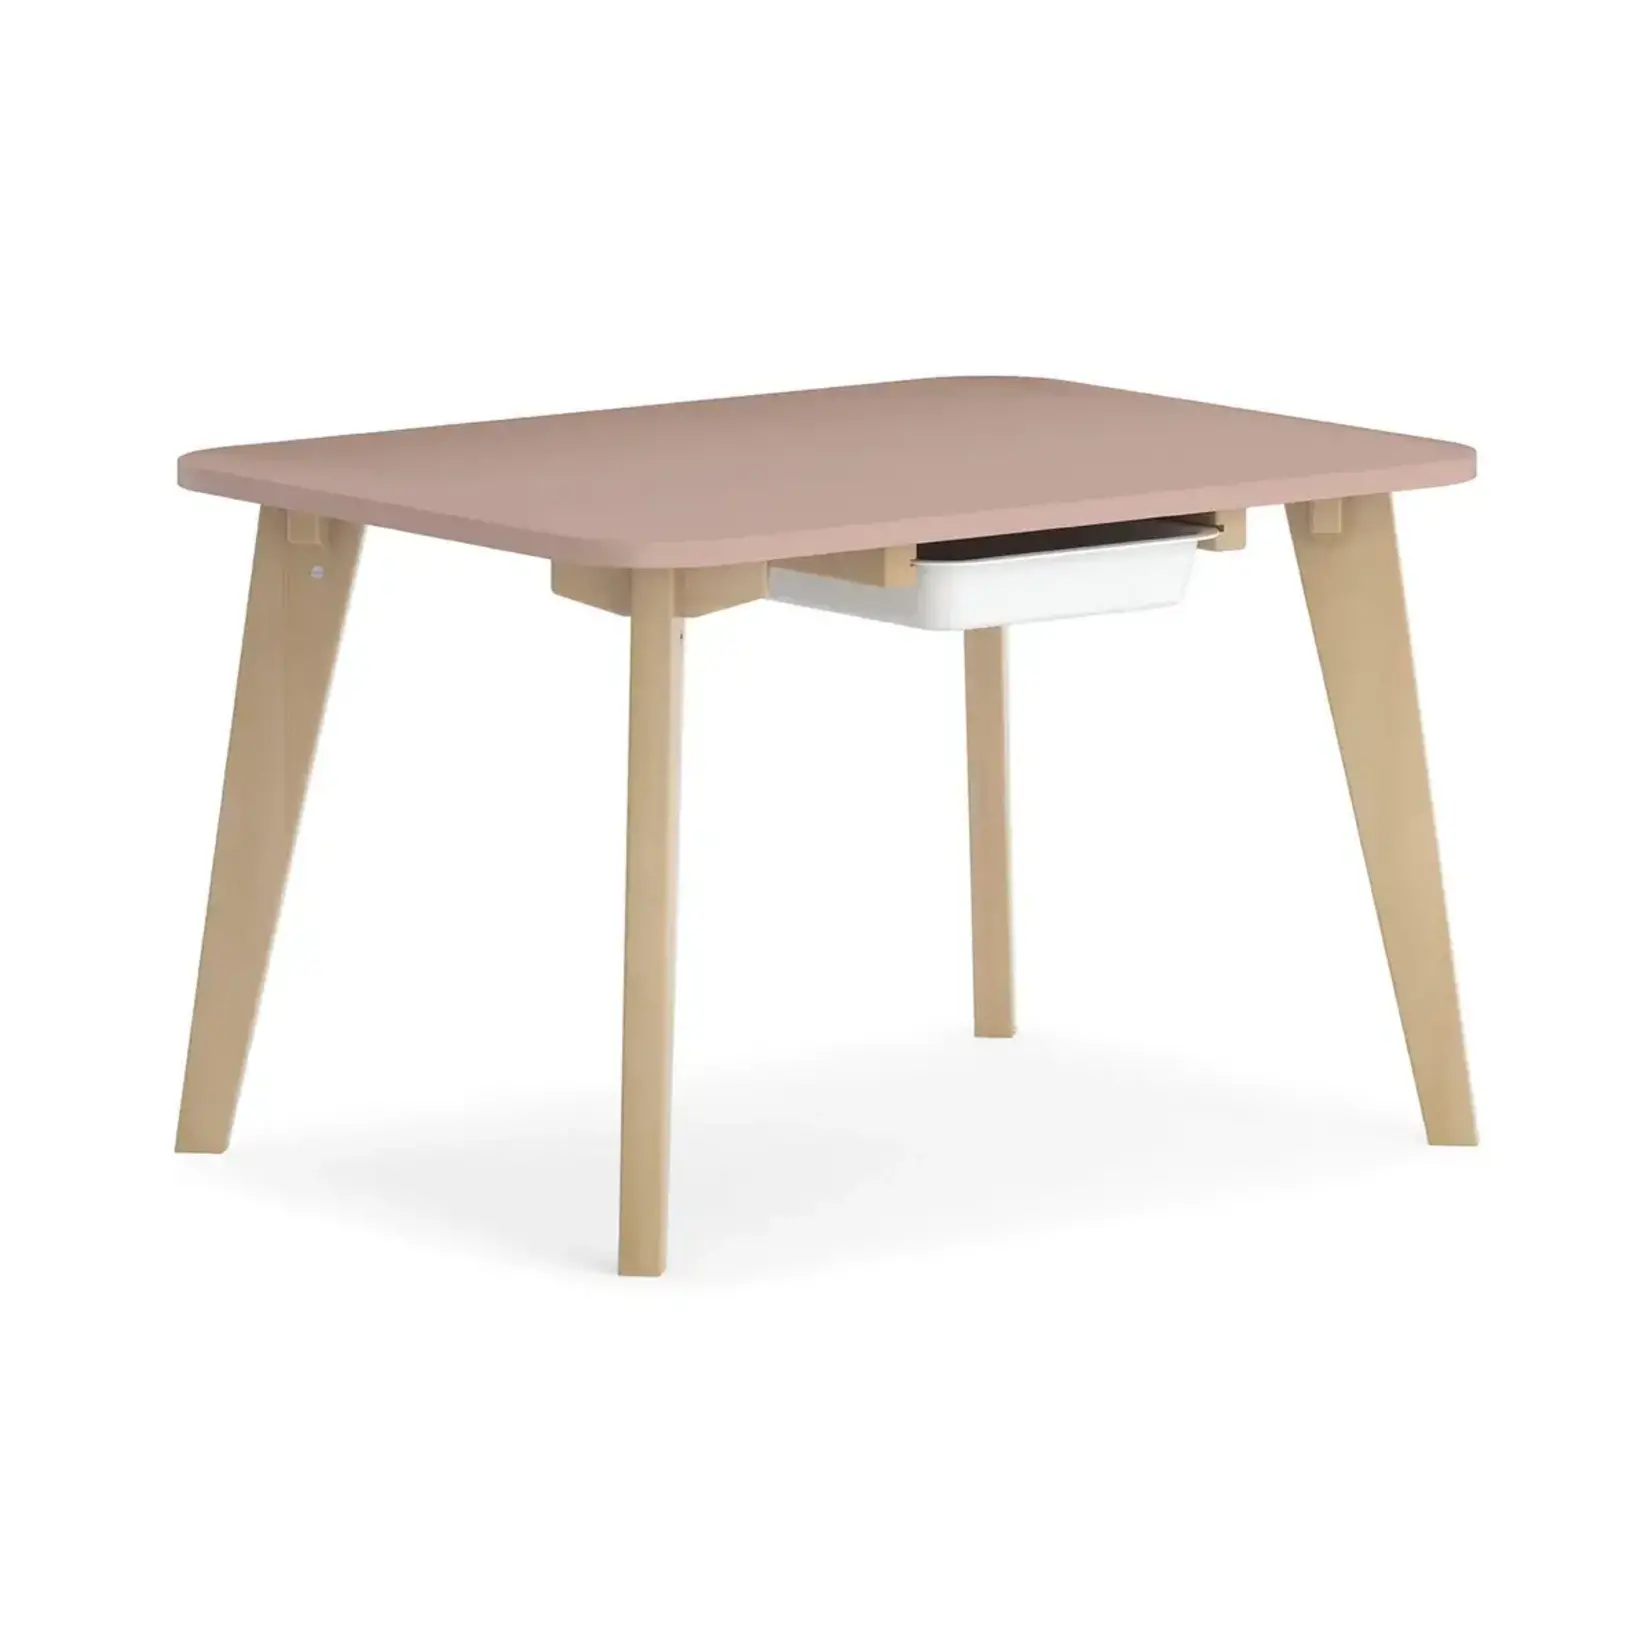 Boori Tidy Table V23 Cherry and Almond